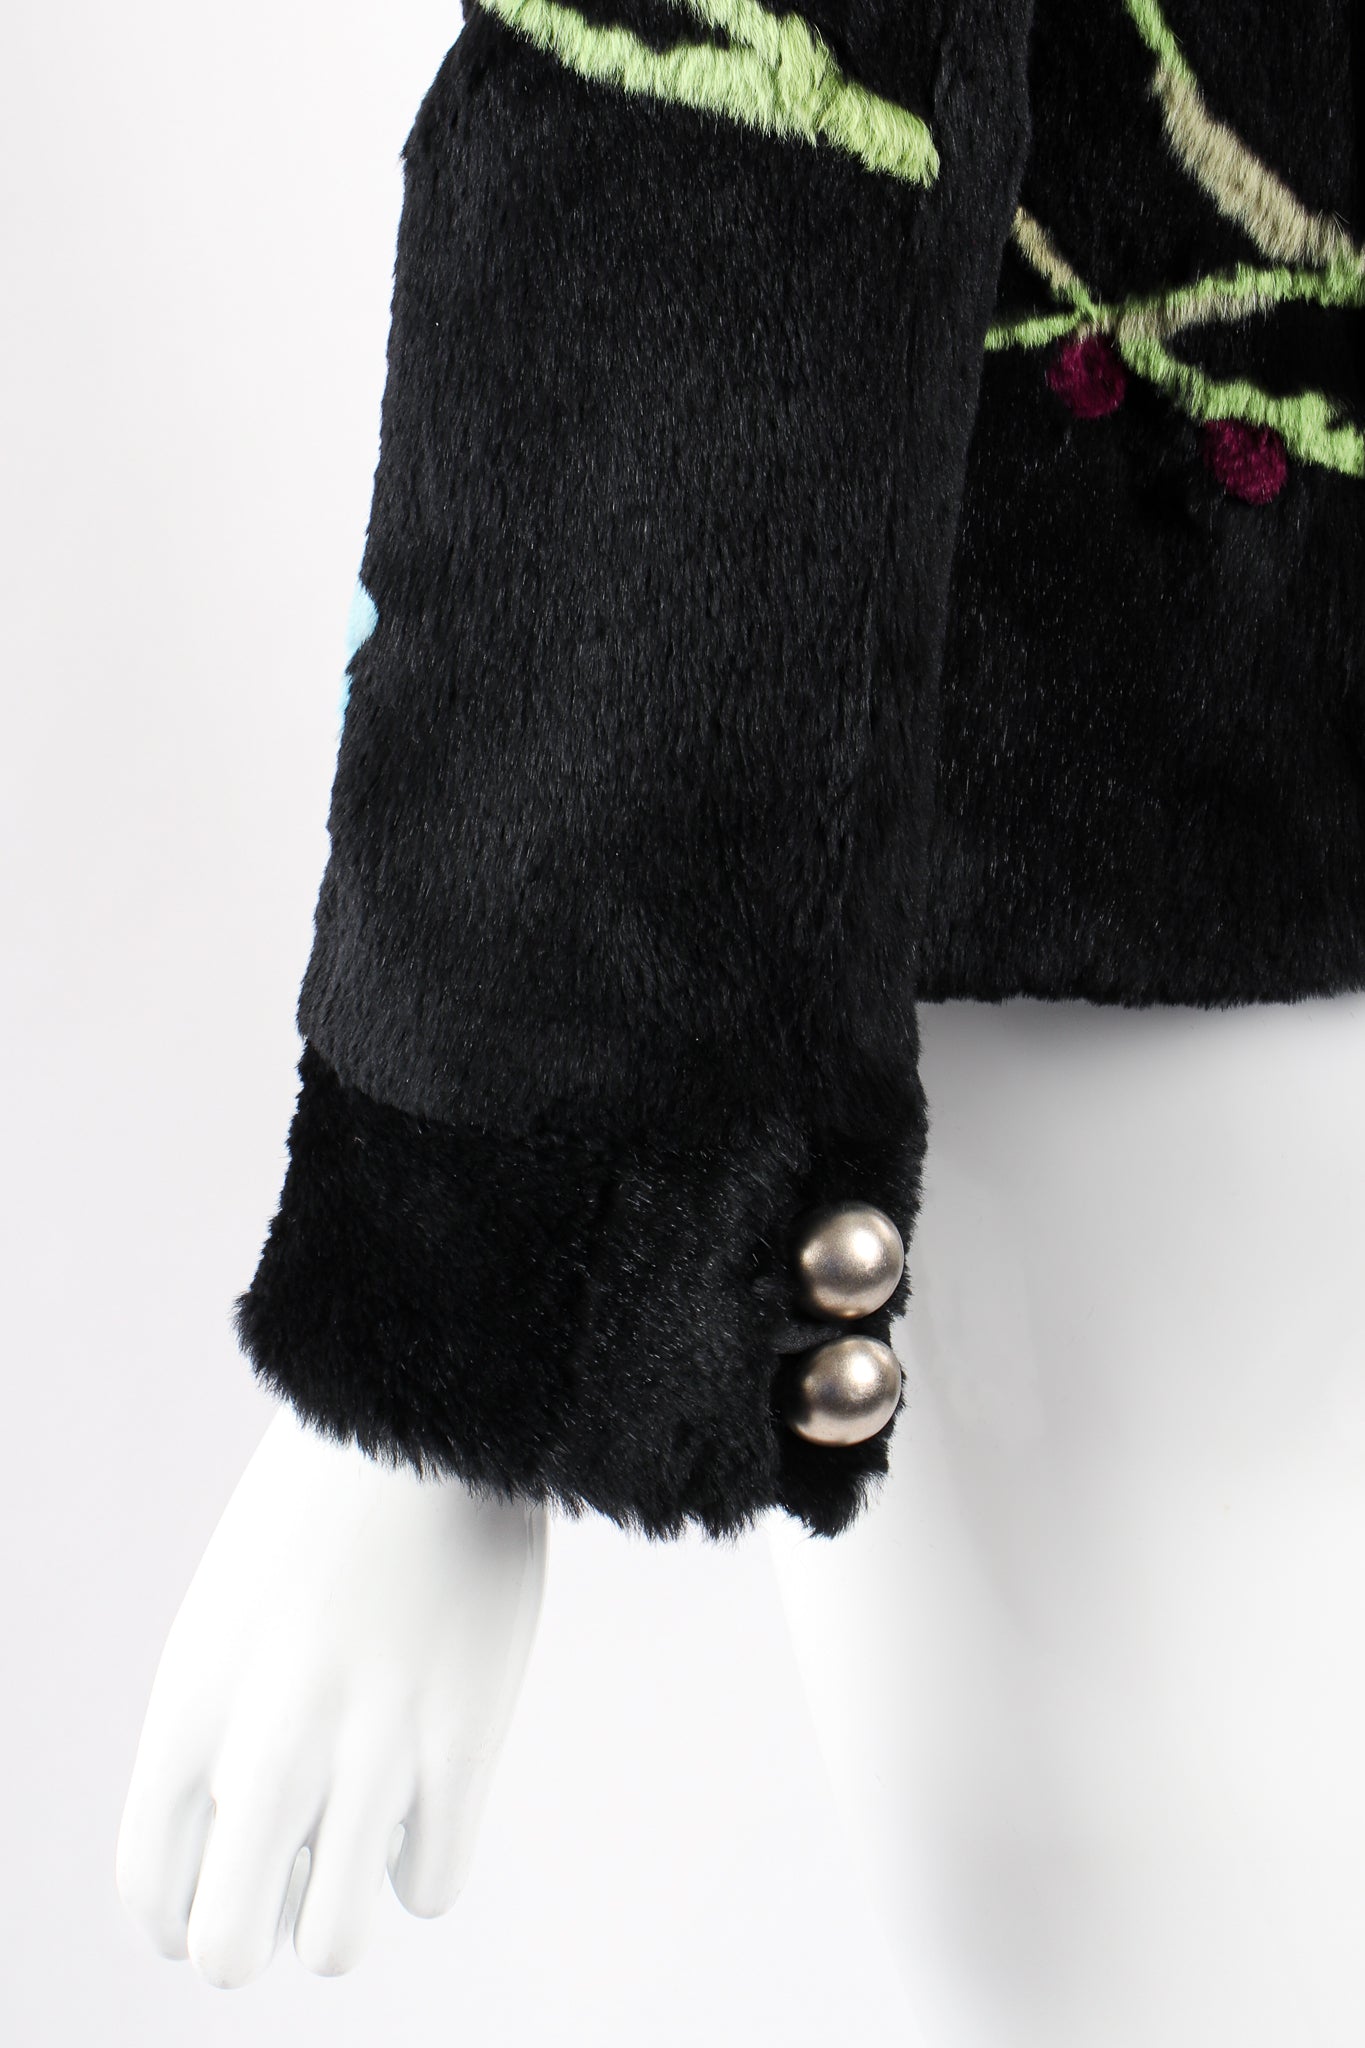 Vintage Giorgio Armani Floral Fur Jacket on Mannequin sleeve cuffs at Recess Los Angeles